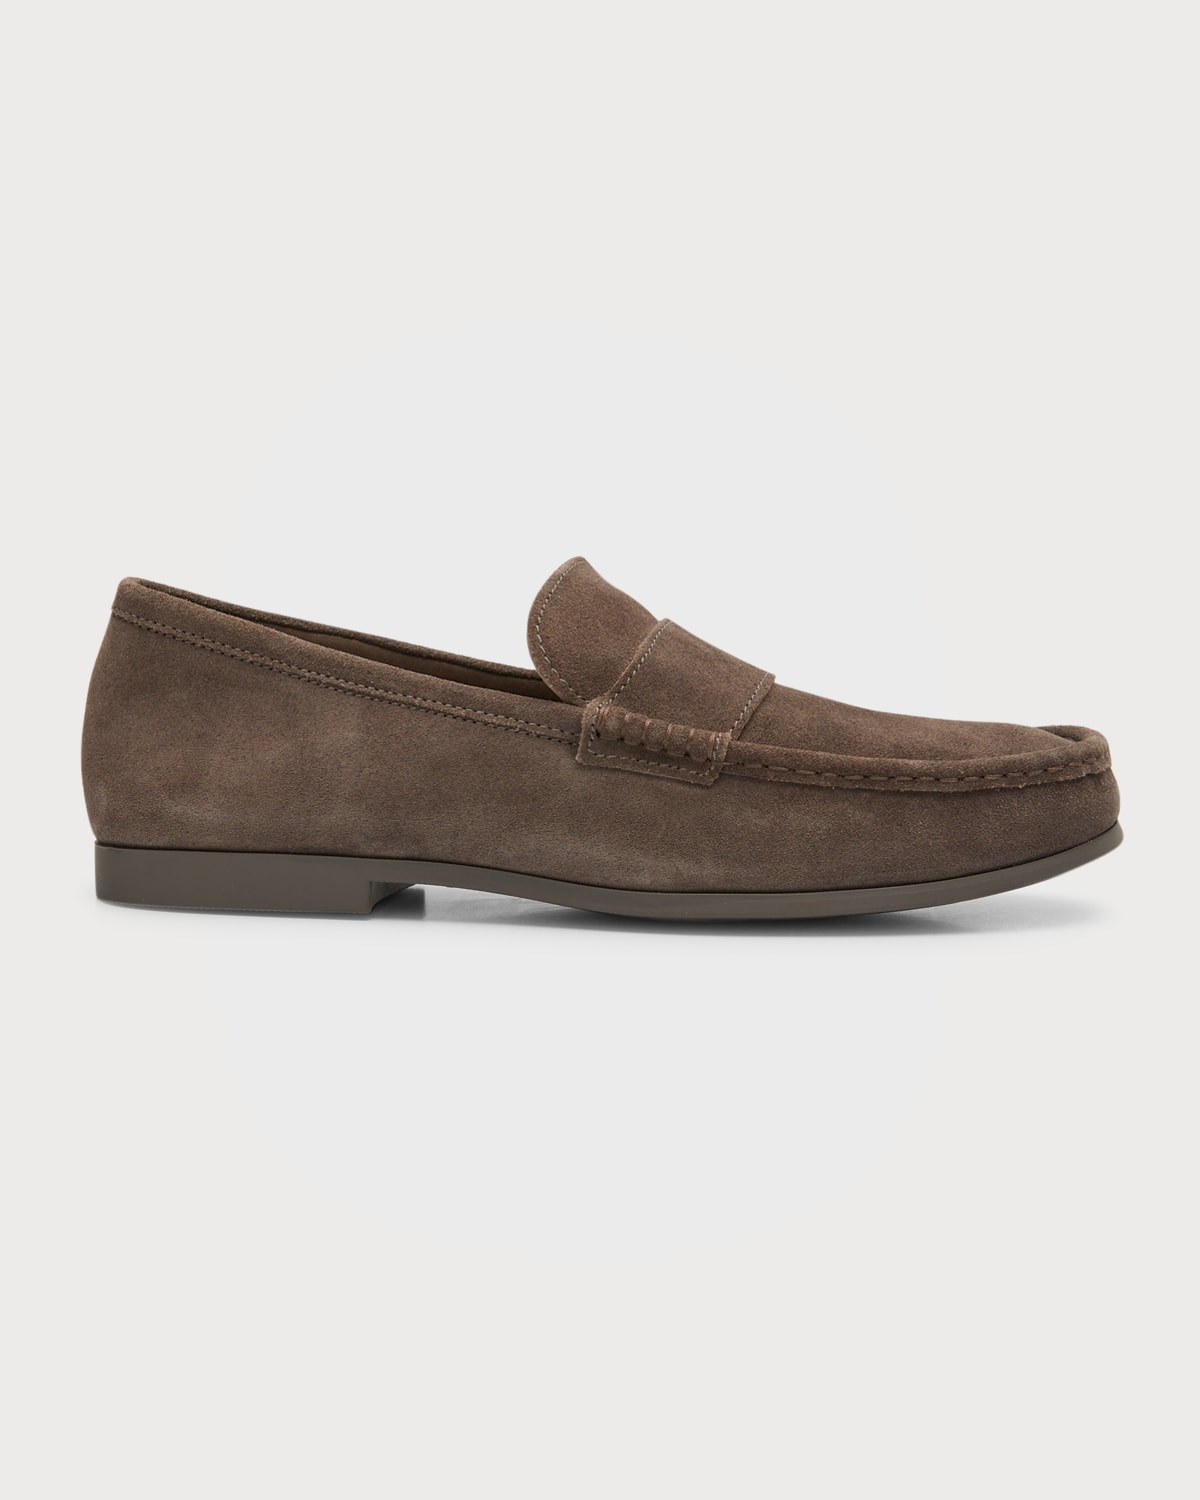 VINCE MEN'S DALY LEATHER PENNY LOAFERS